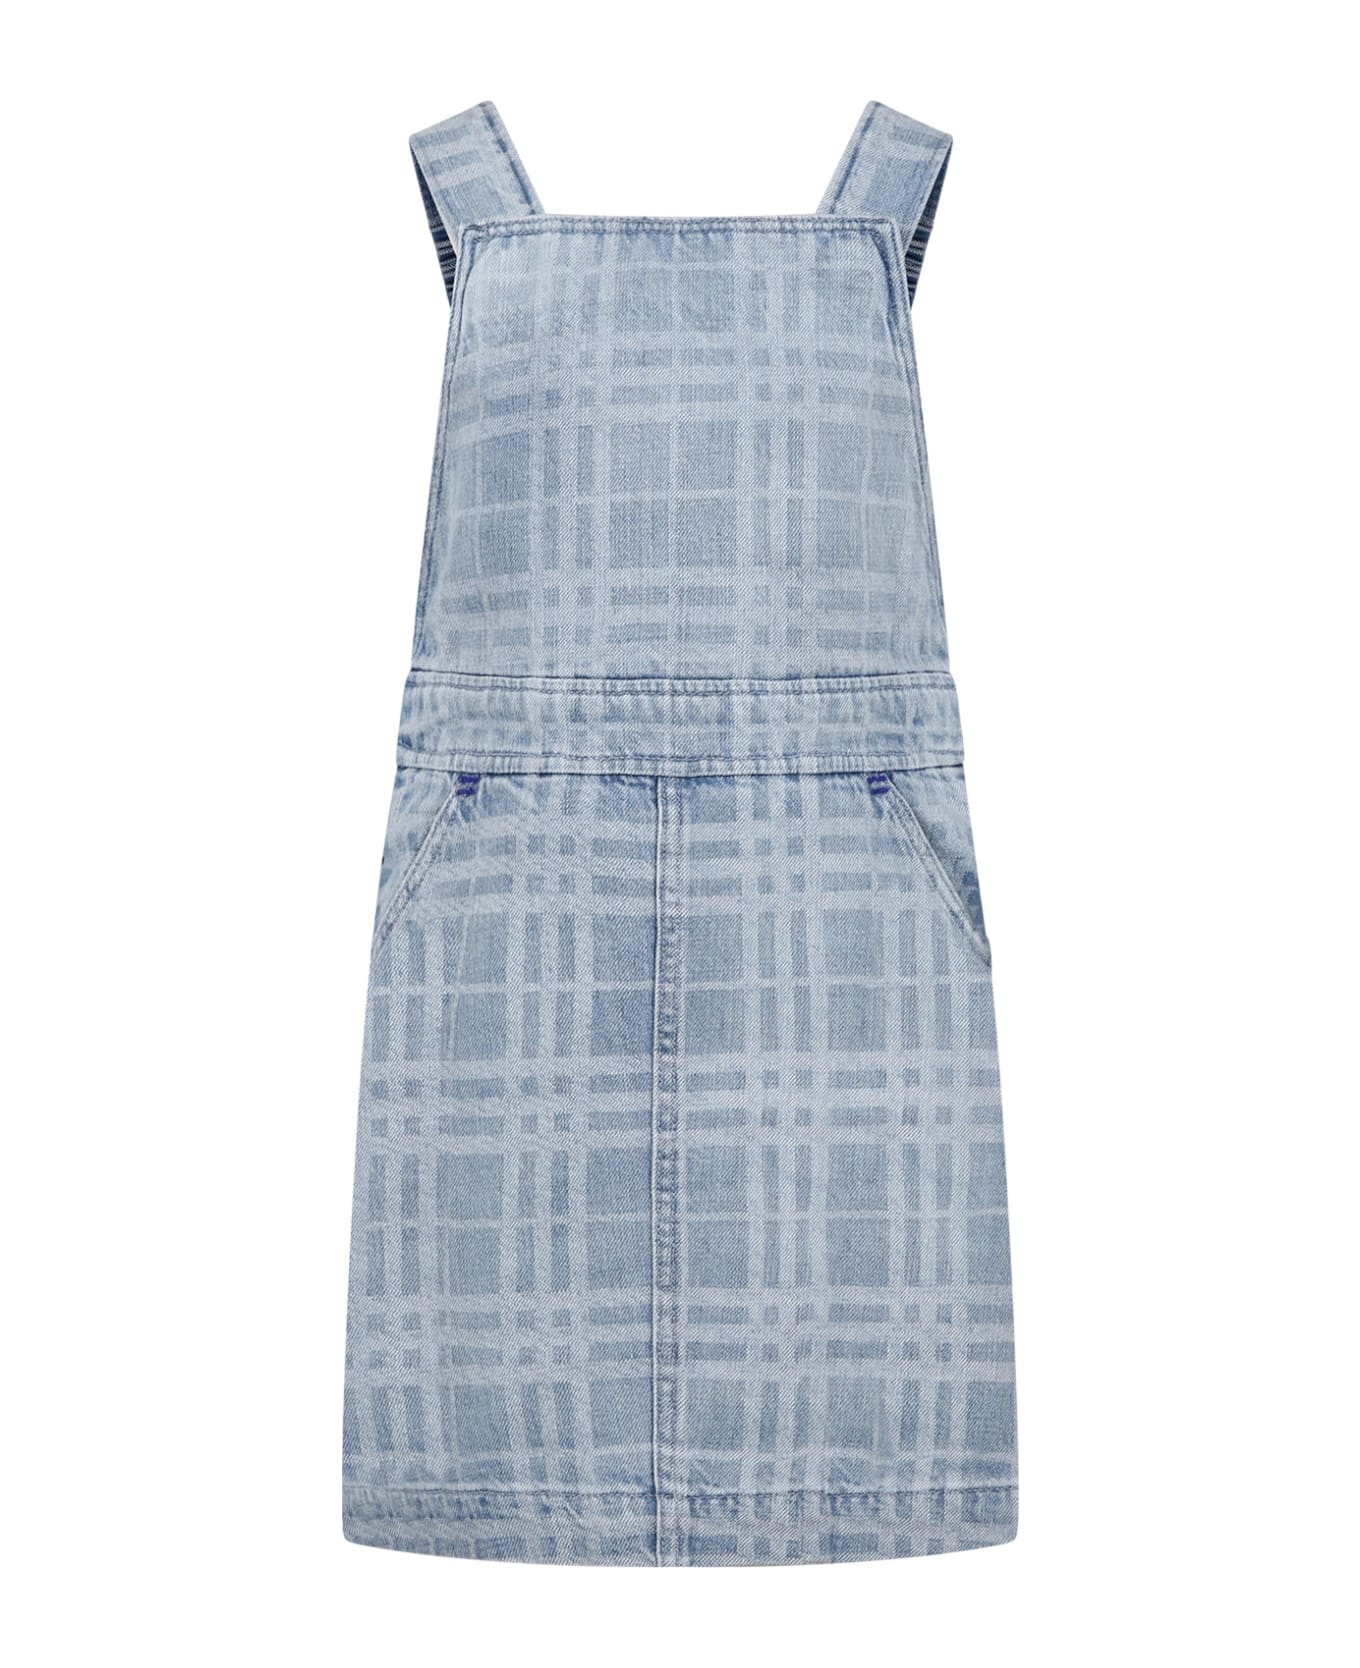 Burberry Denim Dungarees For Girl With Iconic All-over Check - Denim